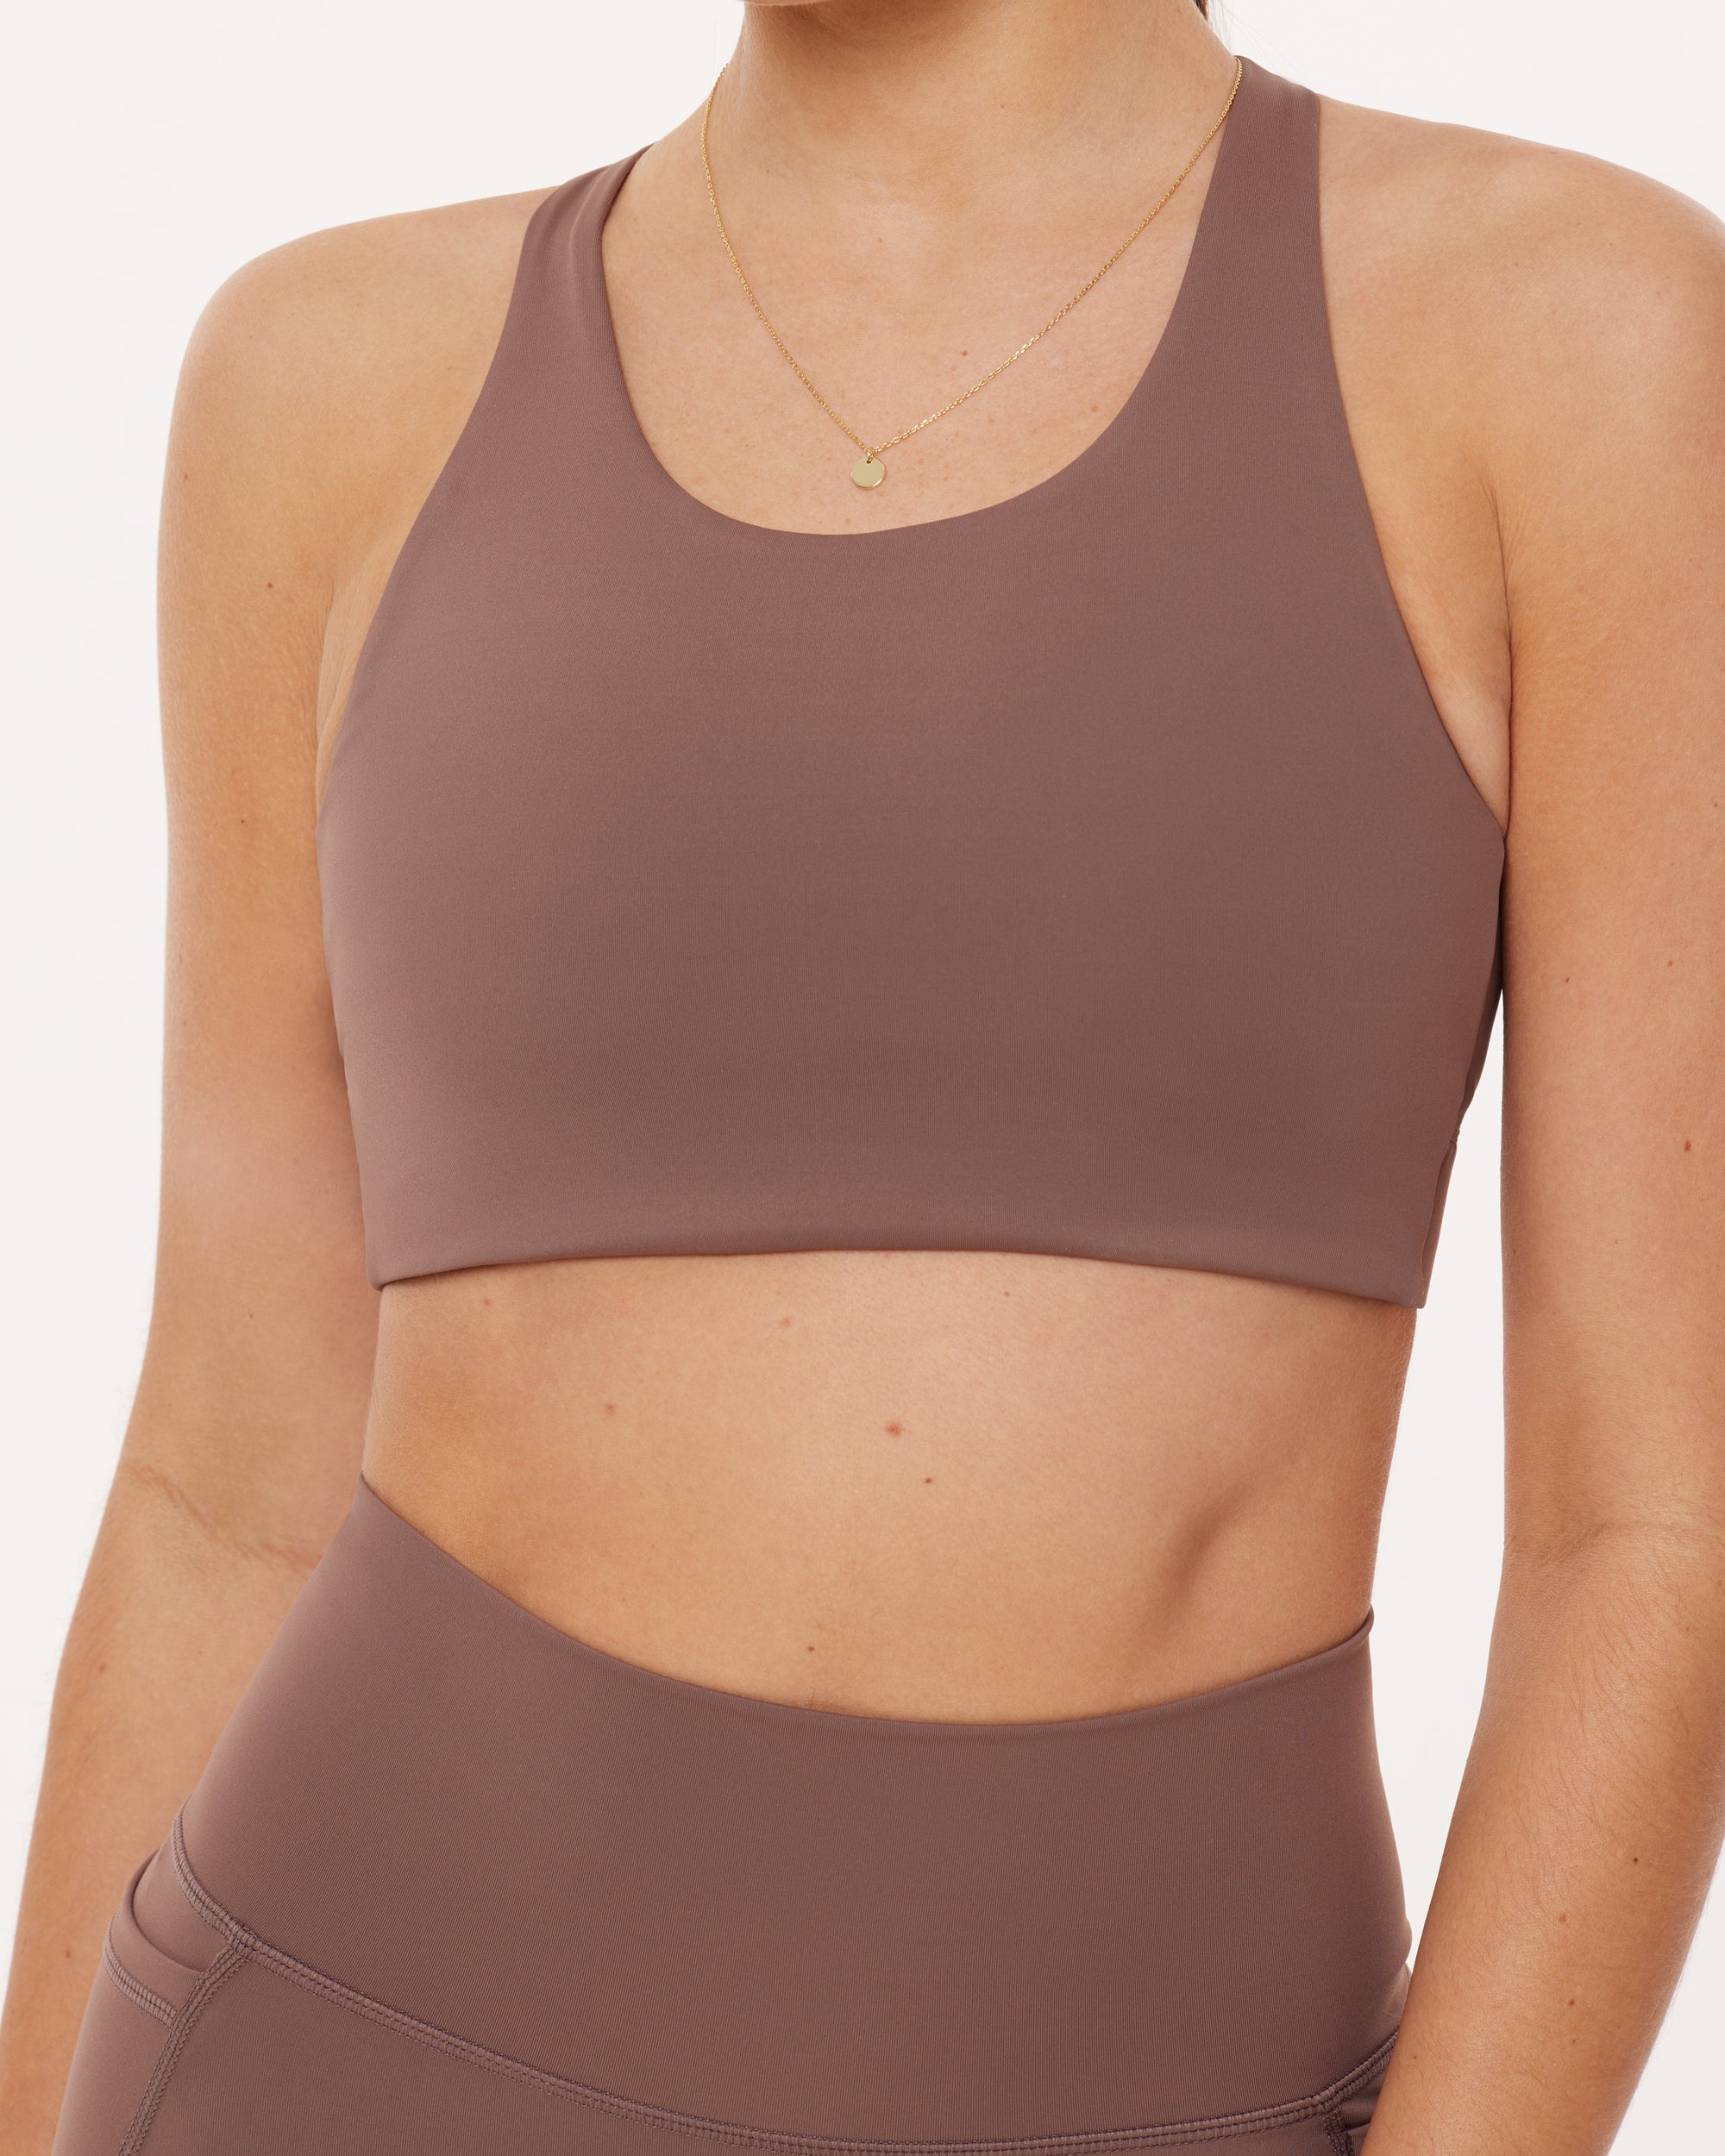 Supportive High-Impact Padded Convertible Sports Bra